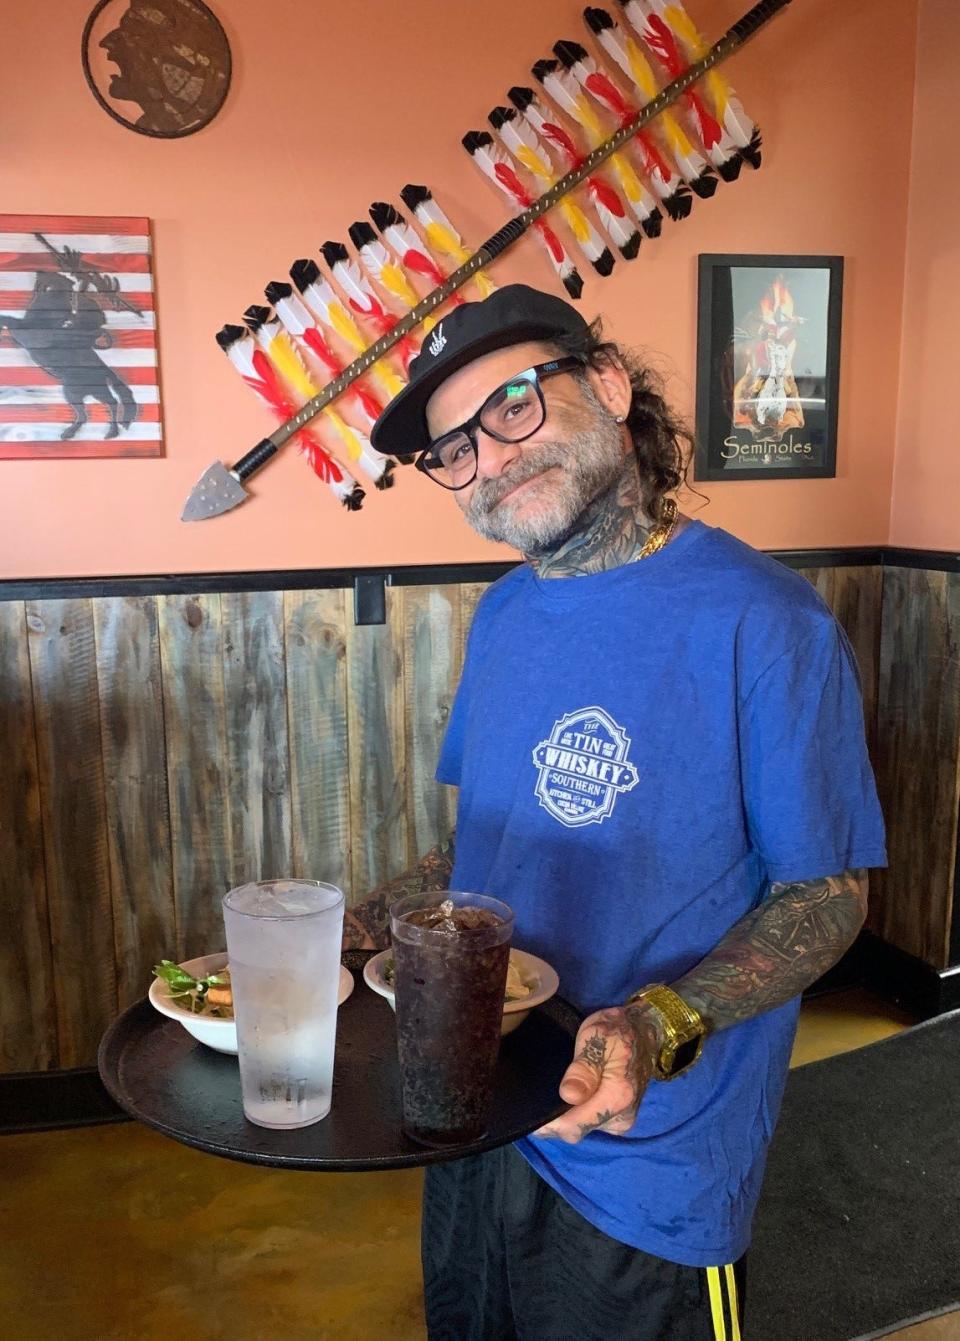 Jayson Jamgochian was a popular Murdock's Southern Bistro server who made the move to Tin Whiskey Southern Still and Kitchen.